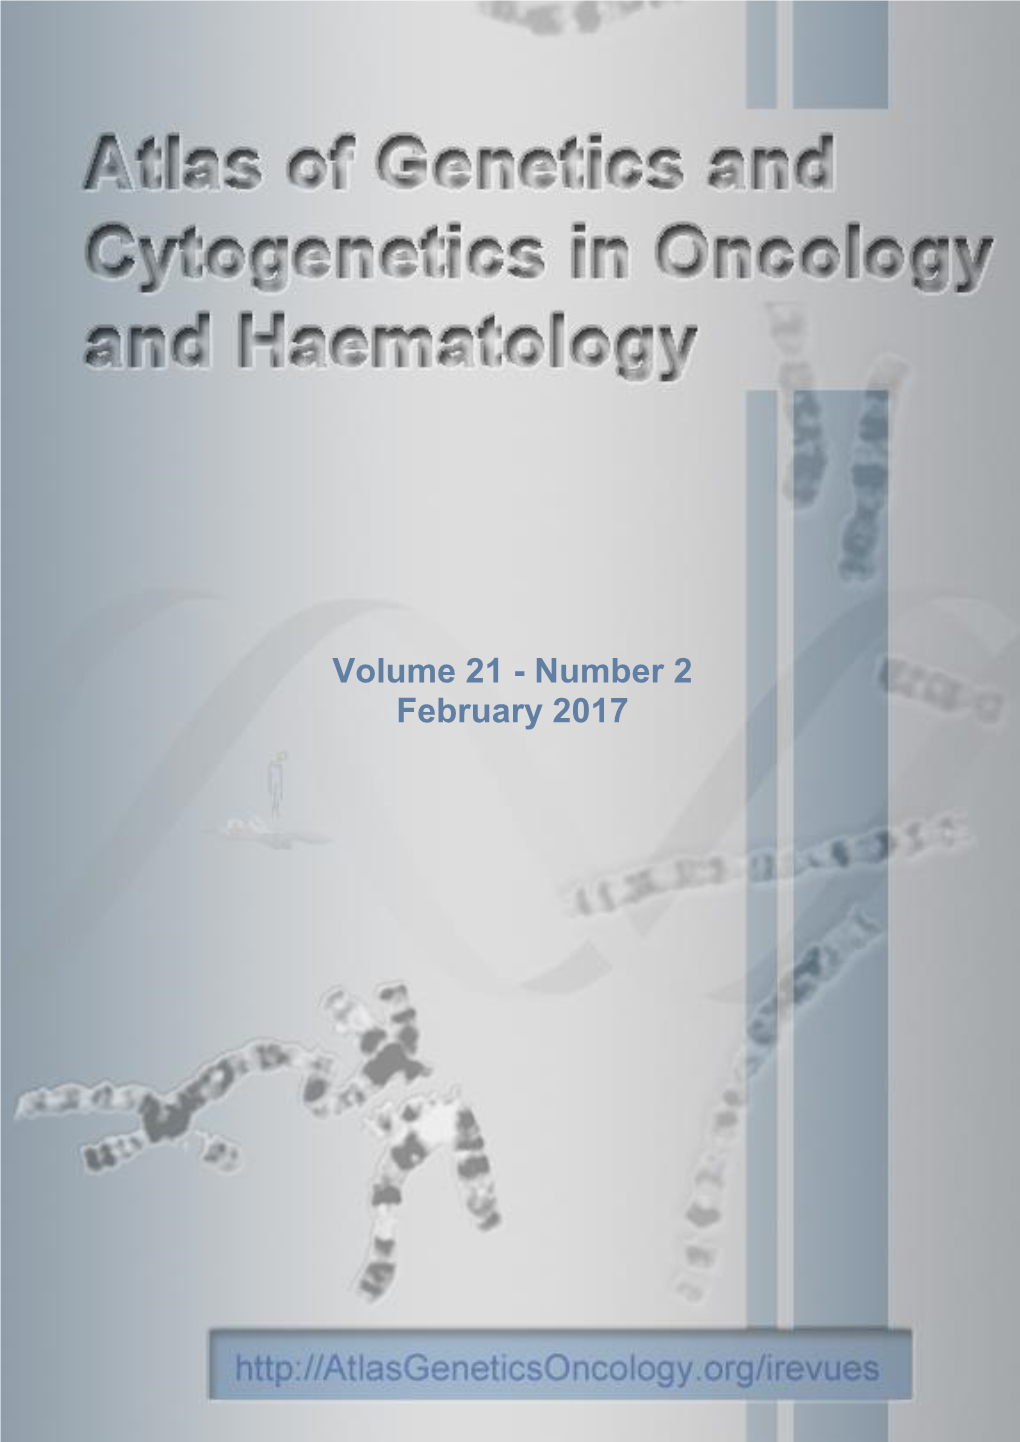 Number 2 February 2017 Atlas of Genetics and Cytogenetics in Oncology and Haematology